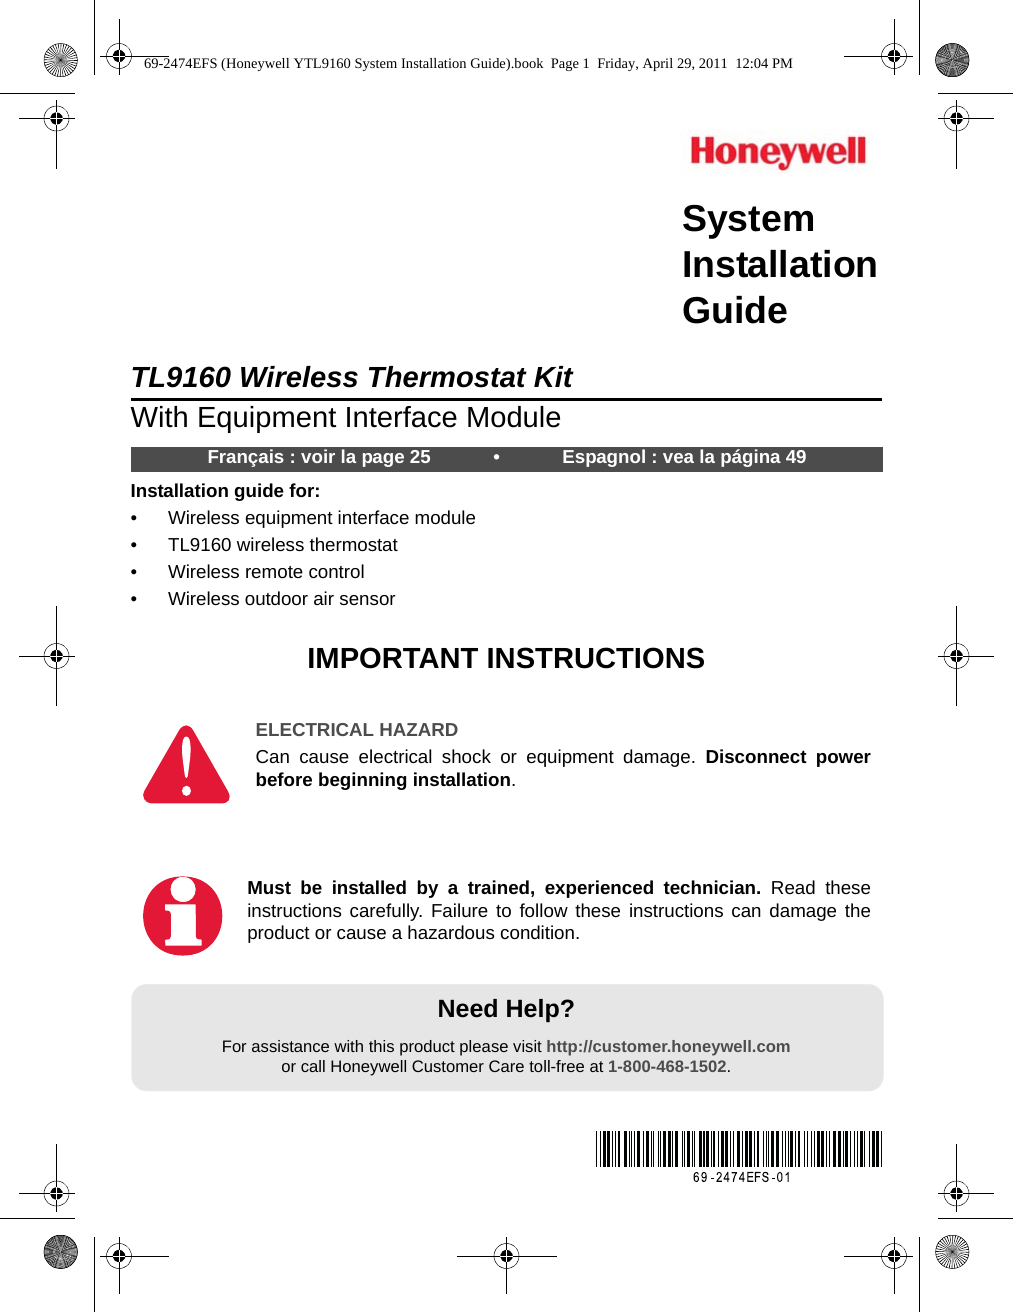 TL9160 Wireless Thermostat KitWith Equipment Interface ModuleInstallation guide for:• Wireless equipment interface module• TL9160 wireless thermostat• Wireless remote control• Wireless outdoor air sensorIMPORTANT INSTRUCTIONSNeed Help?For assistance with this product please visit http://customer.honeywell.comor call Honeywell Customer Care toll-free at 1-800-468-1502.Français : voir la page 25            •            Espagnol : vea la página 49ELECTRICAL HAZARDCan cause electrical shock or equipment damage. Disconnect powerbefore beginning installation.Must be installed by a trained, experienced technician. Read theseinstructions carefully. Failure to follow these instructions can damage theproduct or cause a hazardous condition.SystemInstallationGuide69-2474EFS (Honeywell YTL9160 System Installation Guide).book  Page 1  Friday, April 29, 2011  12:04 PM